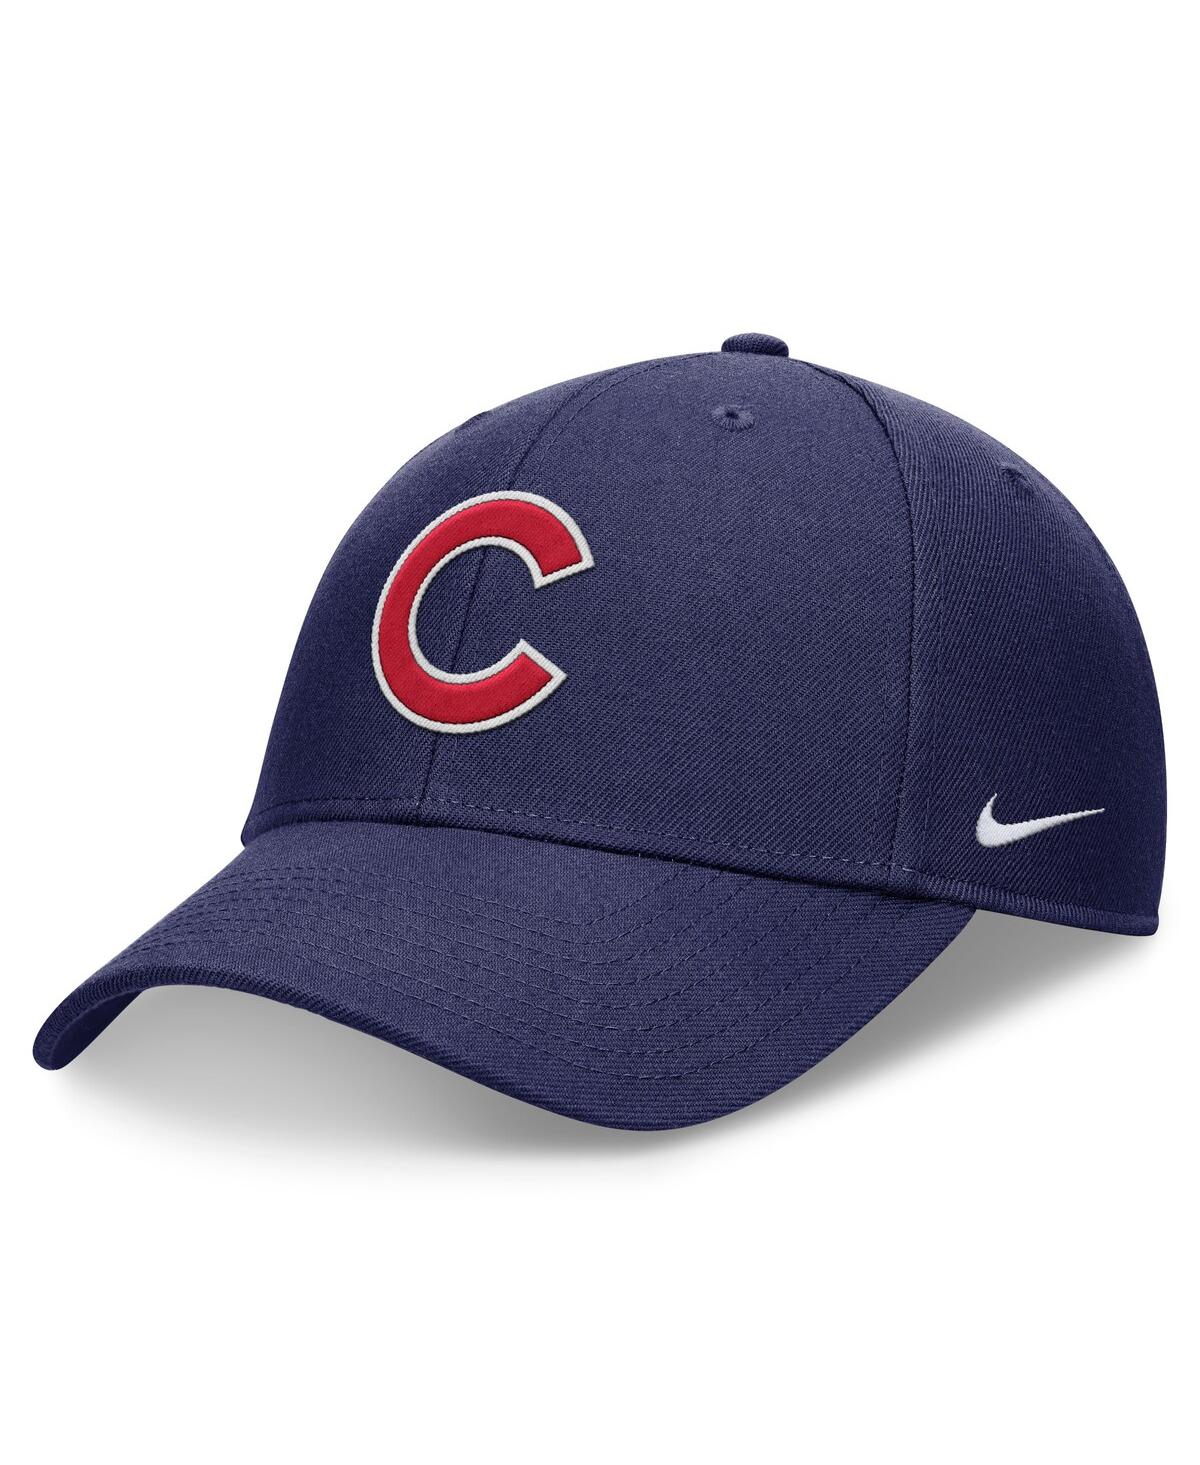 Nike Men's  Royal Chicago Cubs Evergreen Club Performance Adjustable Hat